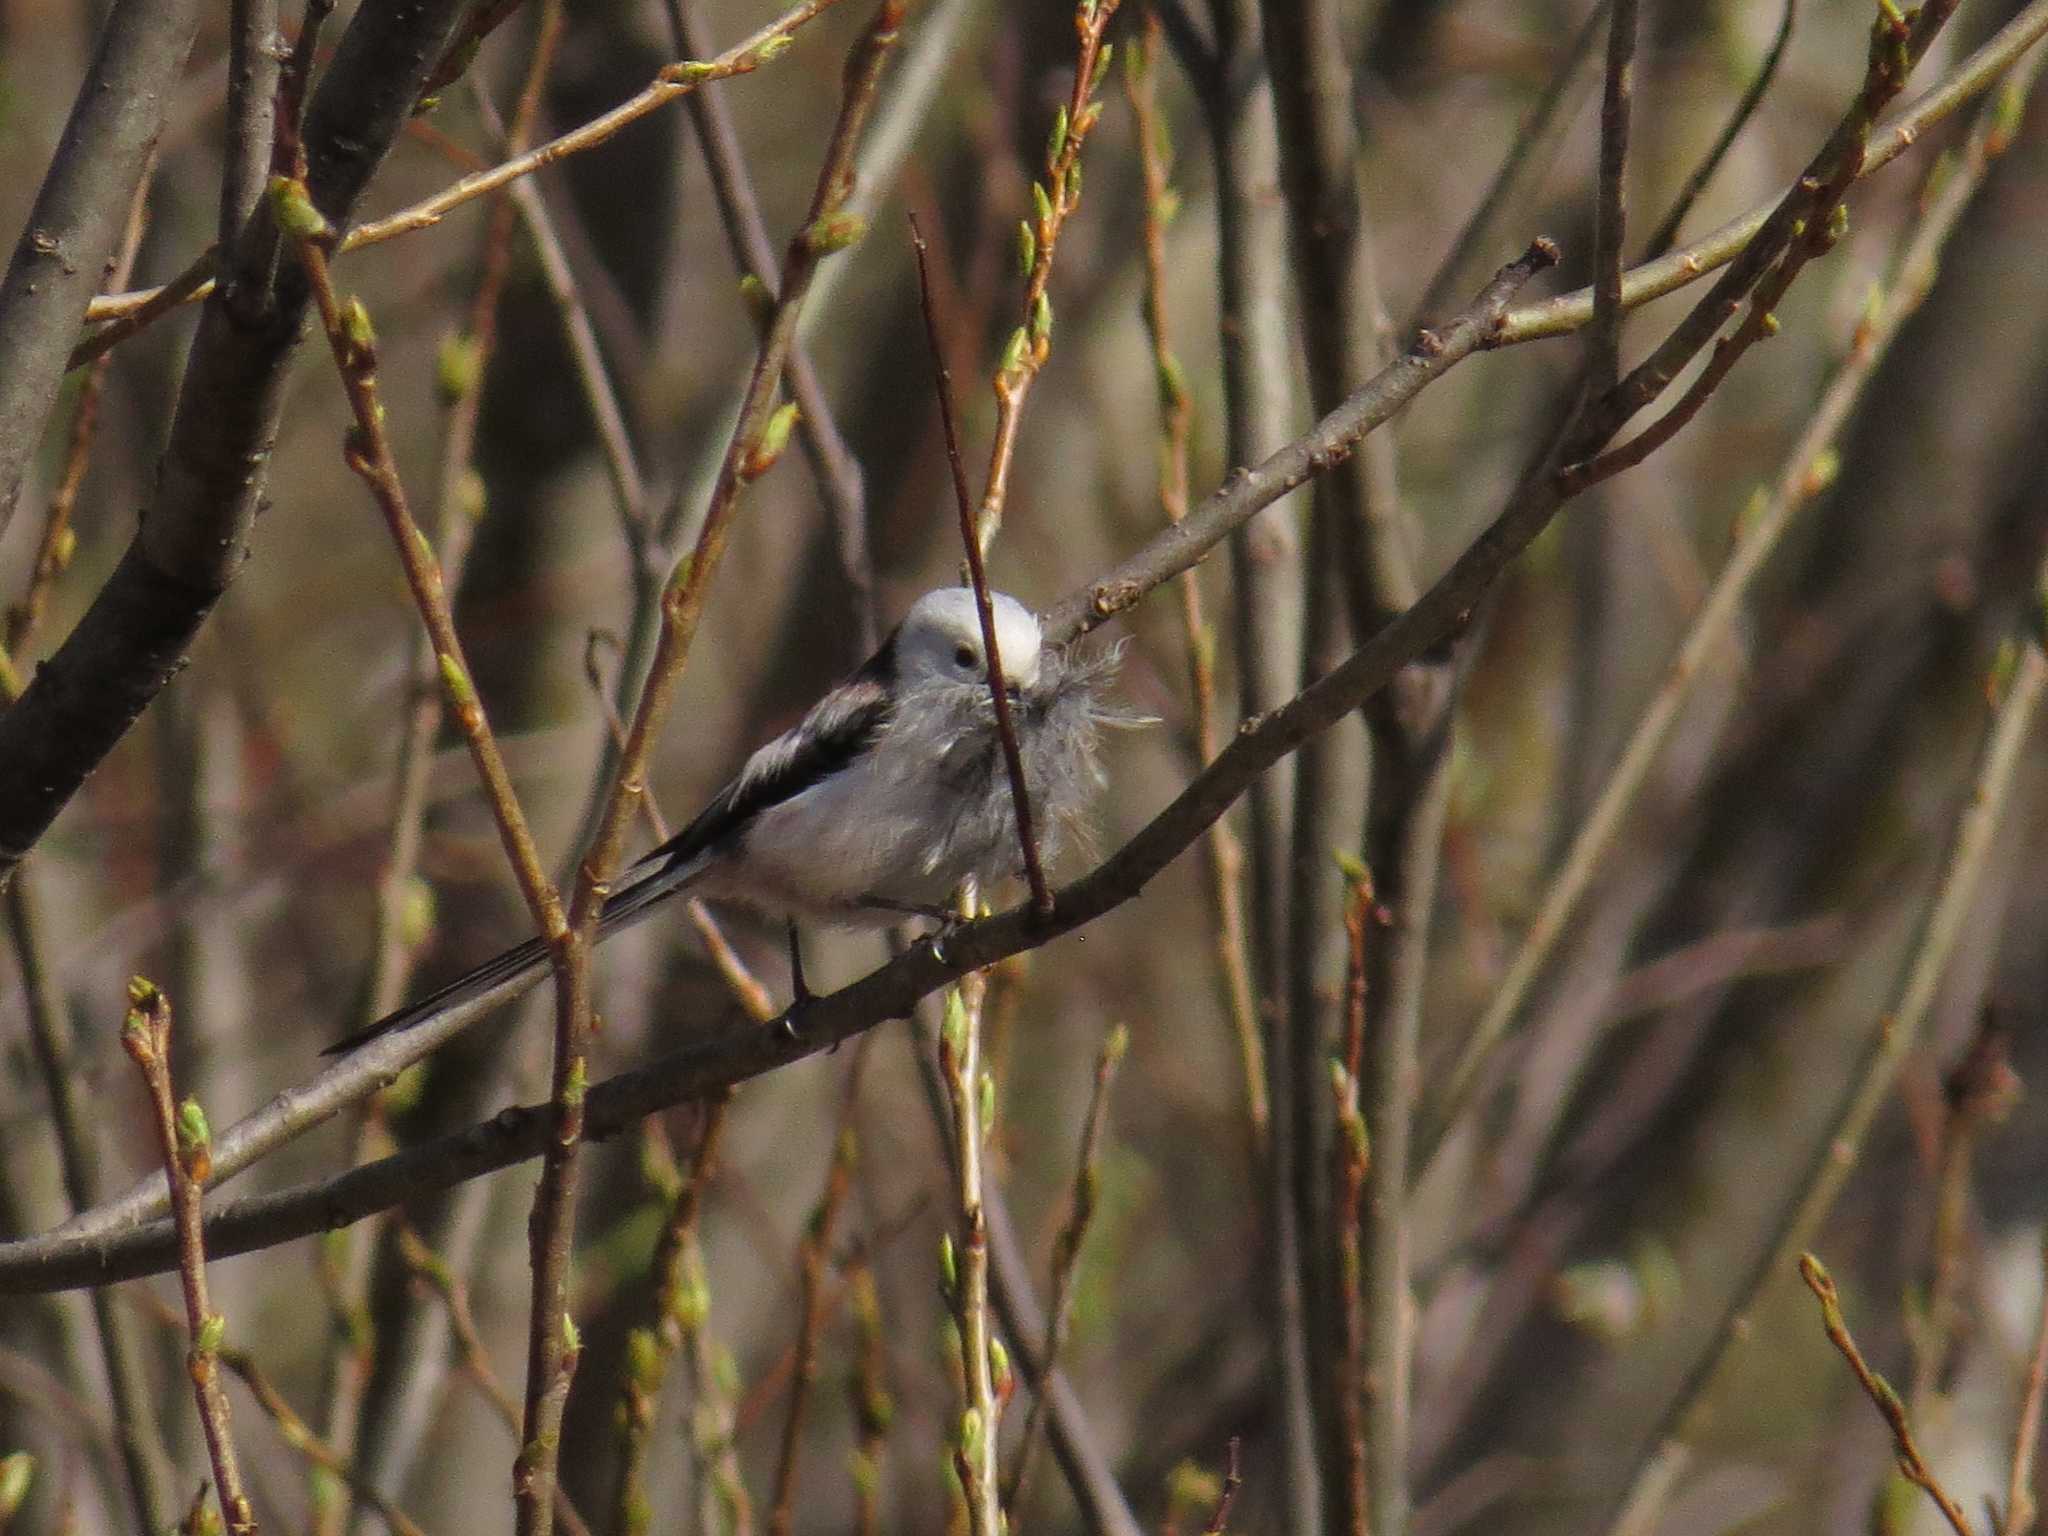 Photo of Long-tailed tit(japonicus) at 札幌;北海道 by Yo